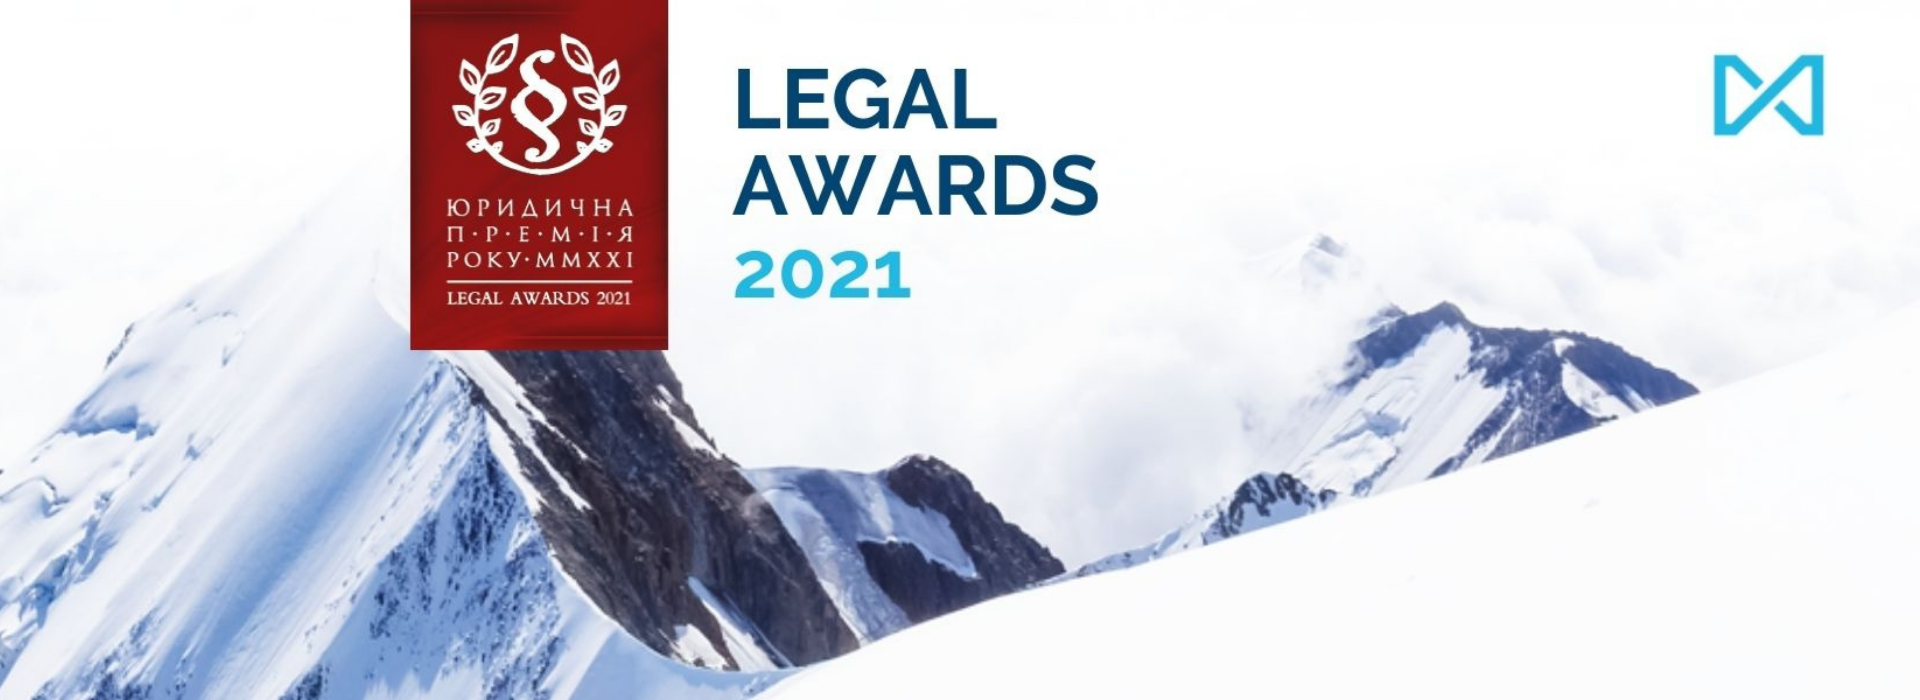 New Achievements of EVERLEGAL at Legal Awards 2021